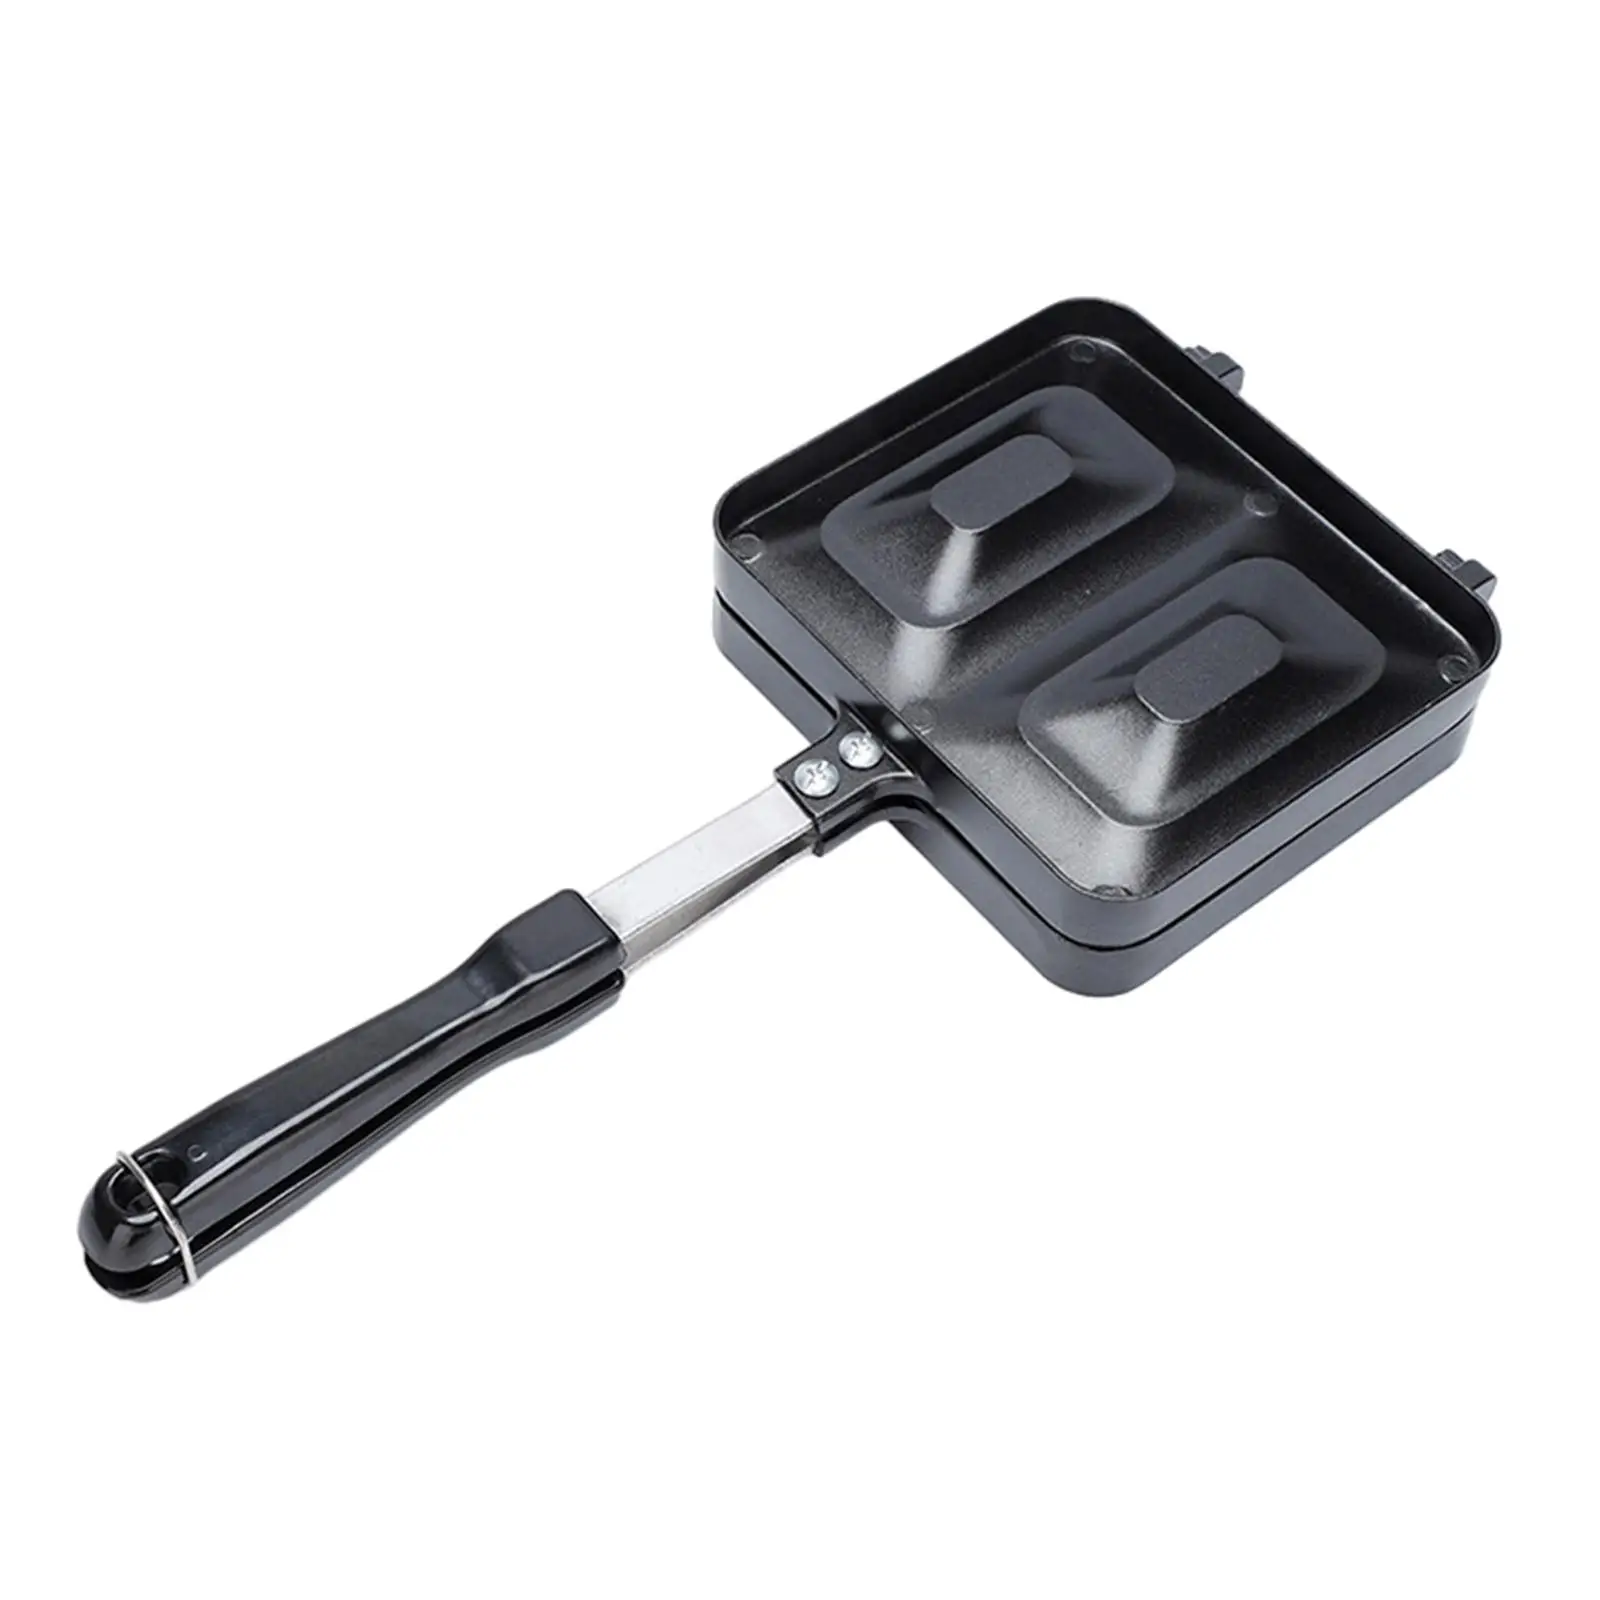 Sandwich Maker Nonstick with Double Handleslockable Double Handles Cooking Baking Utensil for Lunch Toast Waffle Steak Pancakes